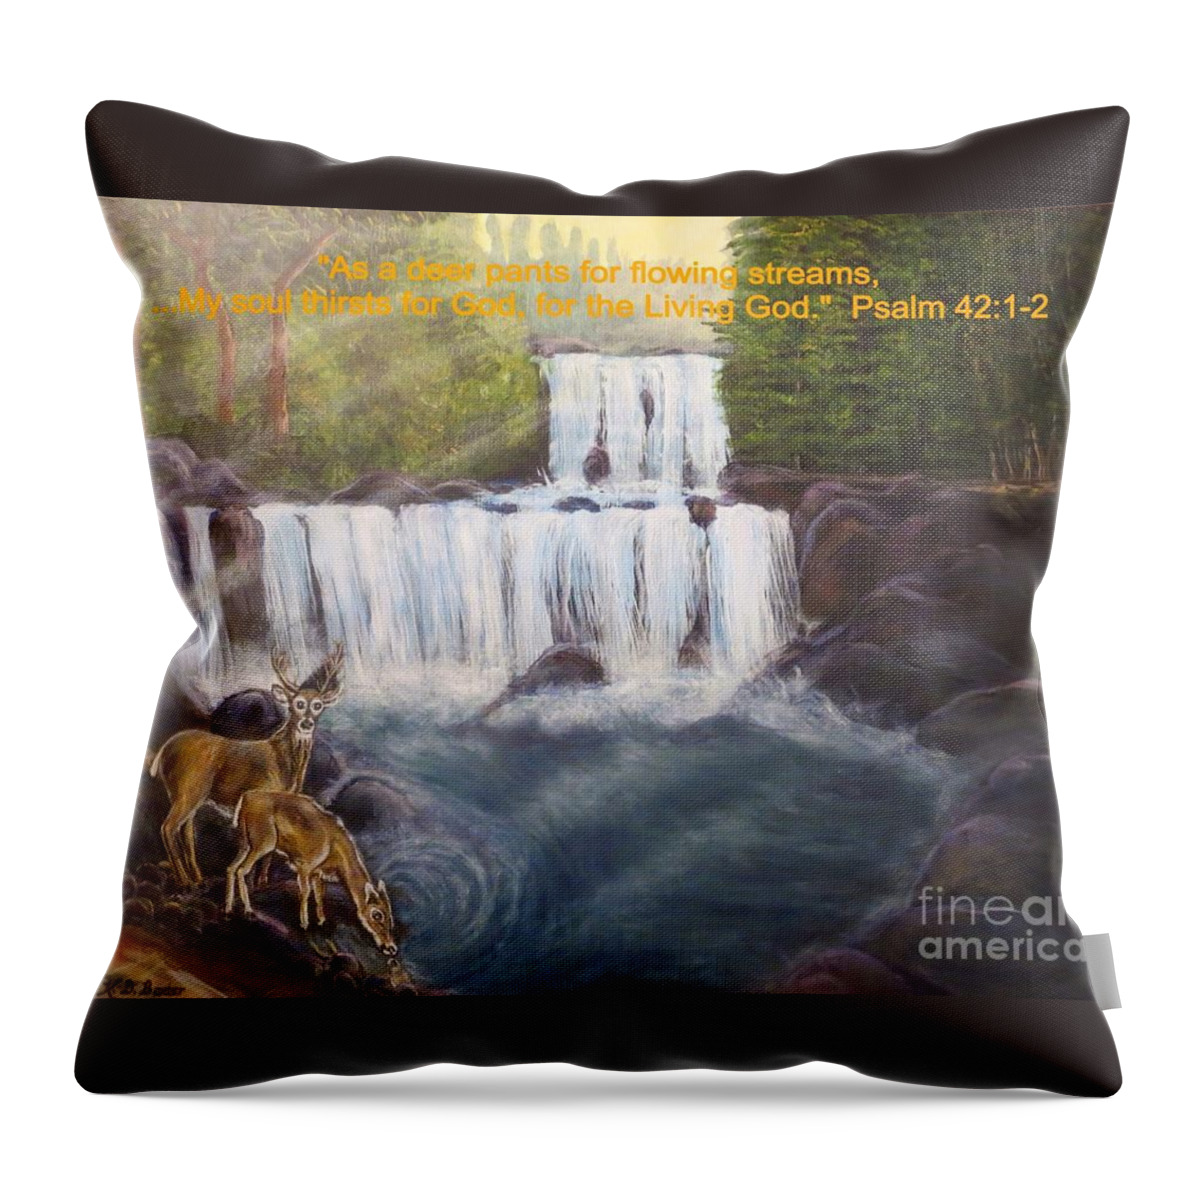 Two-tier Or Multiple Level Waterfall Like In The Great Smoky Mountains Fast Moving Water Dark Gray Rock Evergreen Trees Light Shining On Water Two Deer Drinking From The Water Eddy In A Pool Of Water Inspirational Quote Throw Pillow featuring the painting As the Deer Panteth For Flowing Streams by Kimberlee Baxter